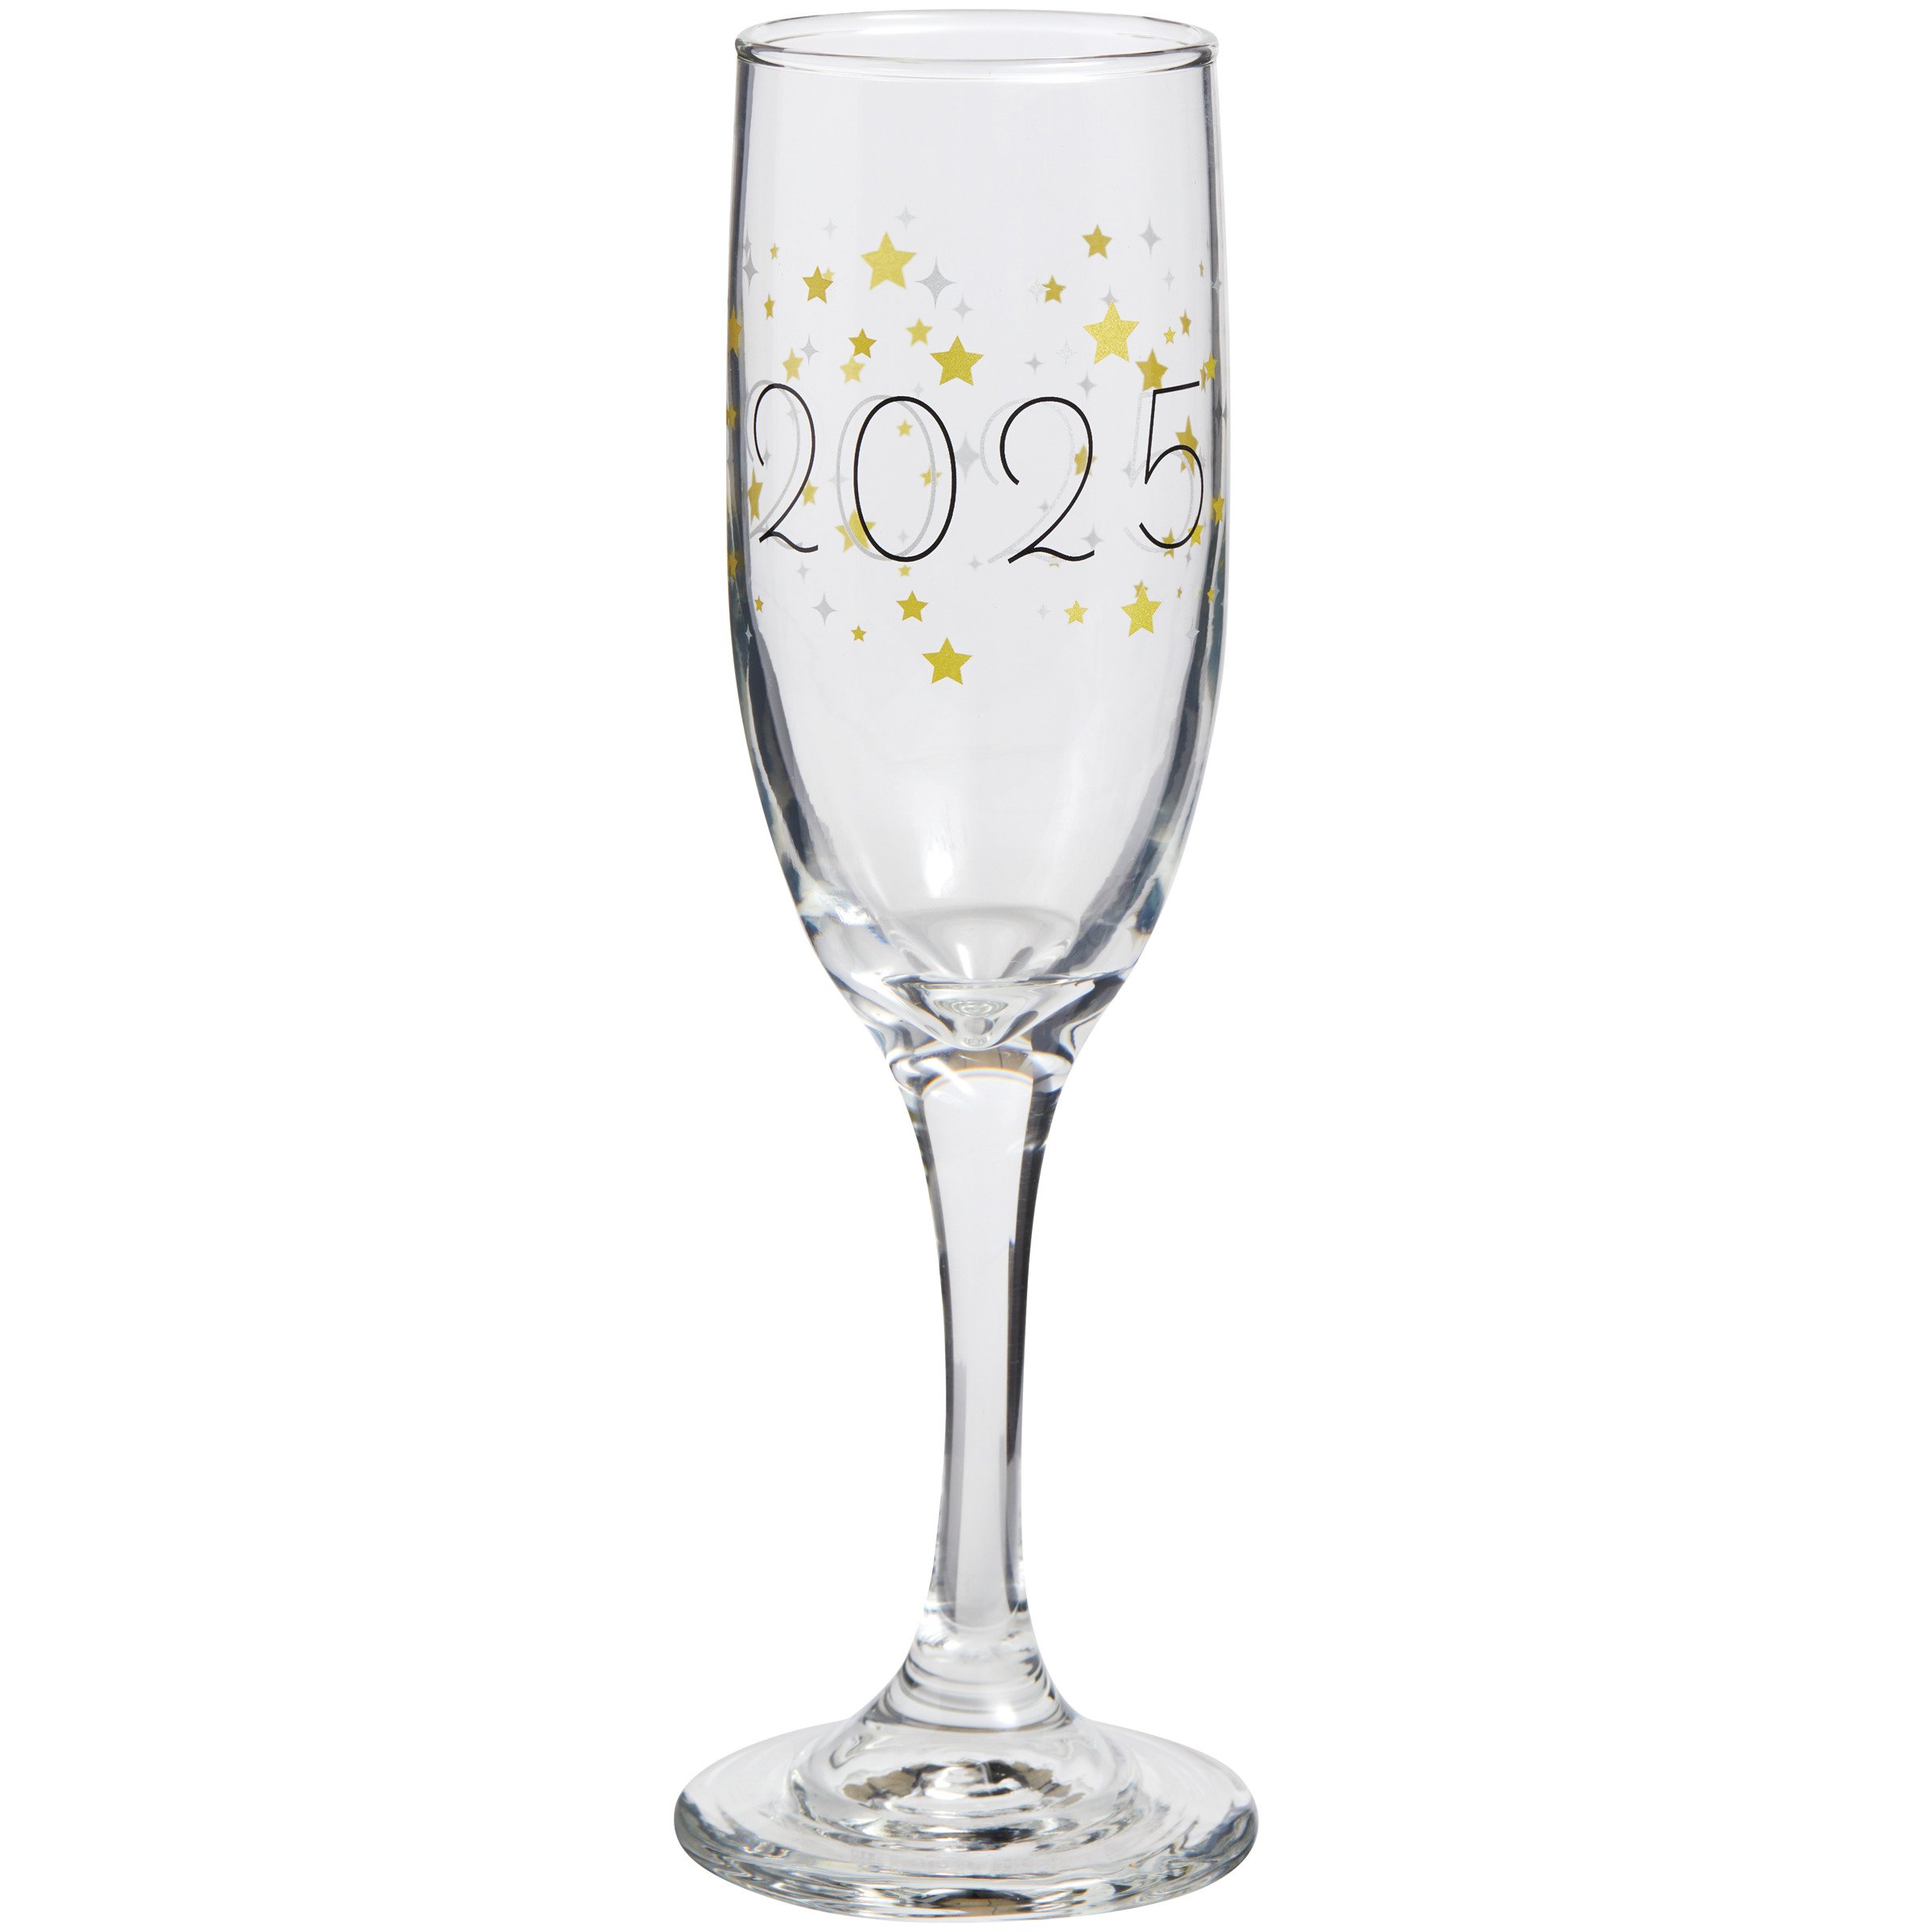 Cristar 2024 New Years Glass Champagne Flute Shop Glasses & Mugs at HEB